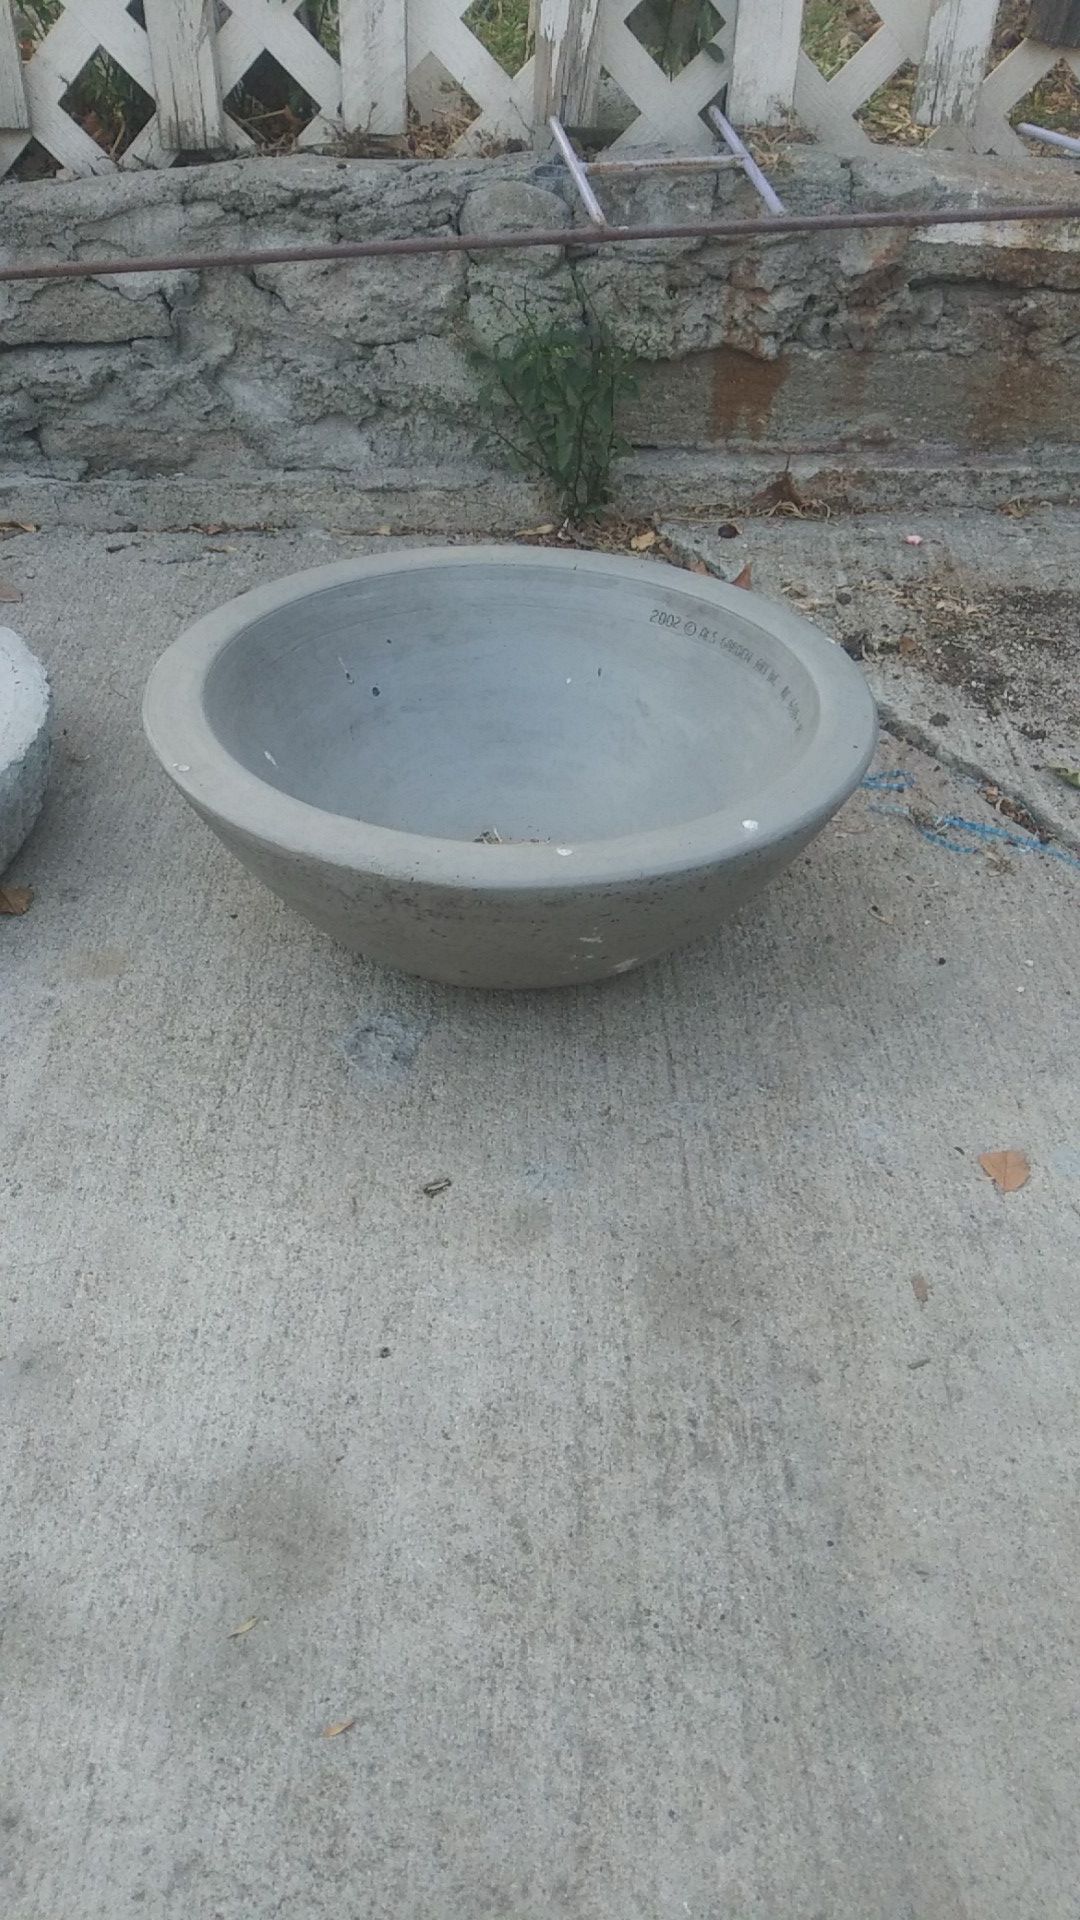 Cement bowl for a fountain or whatever you like